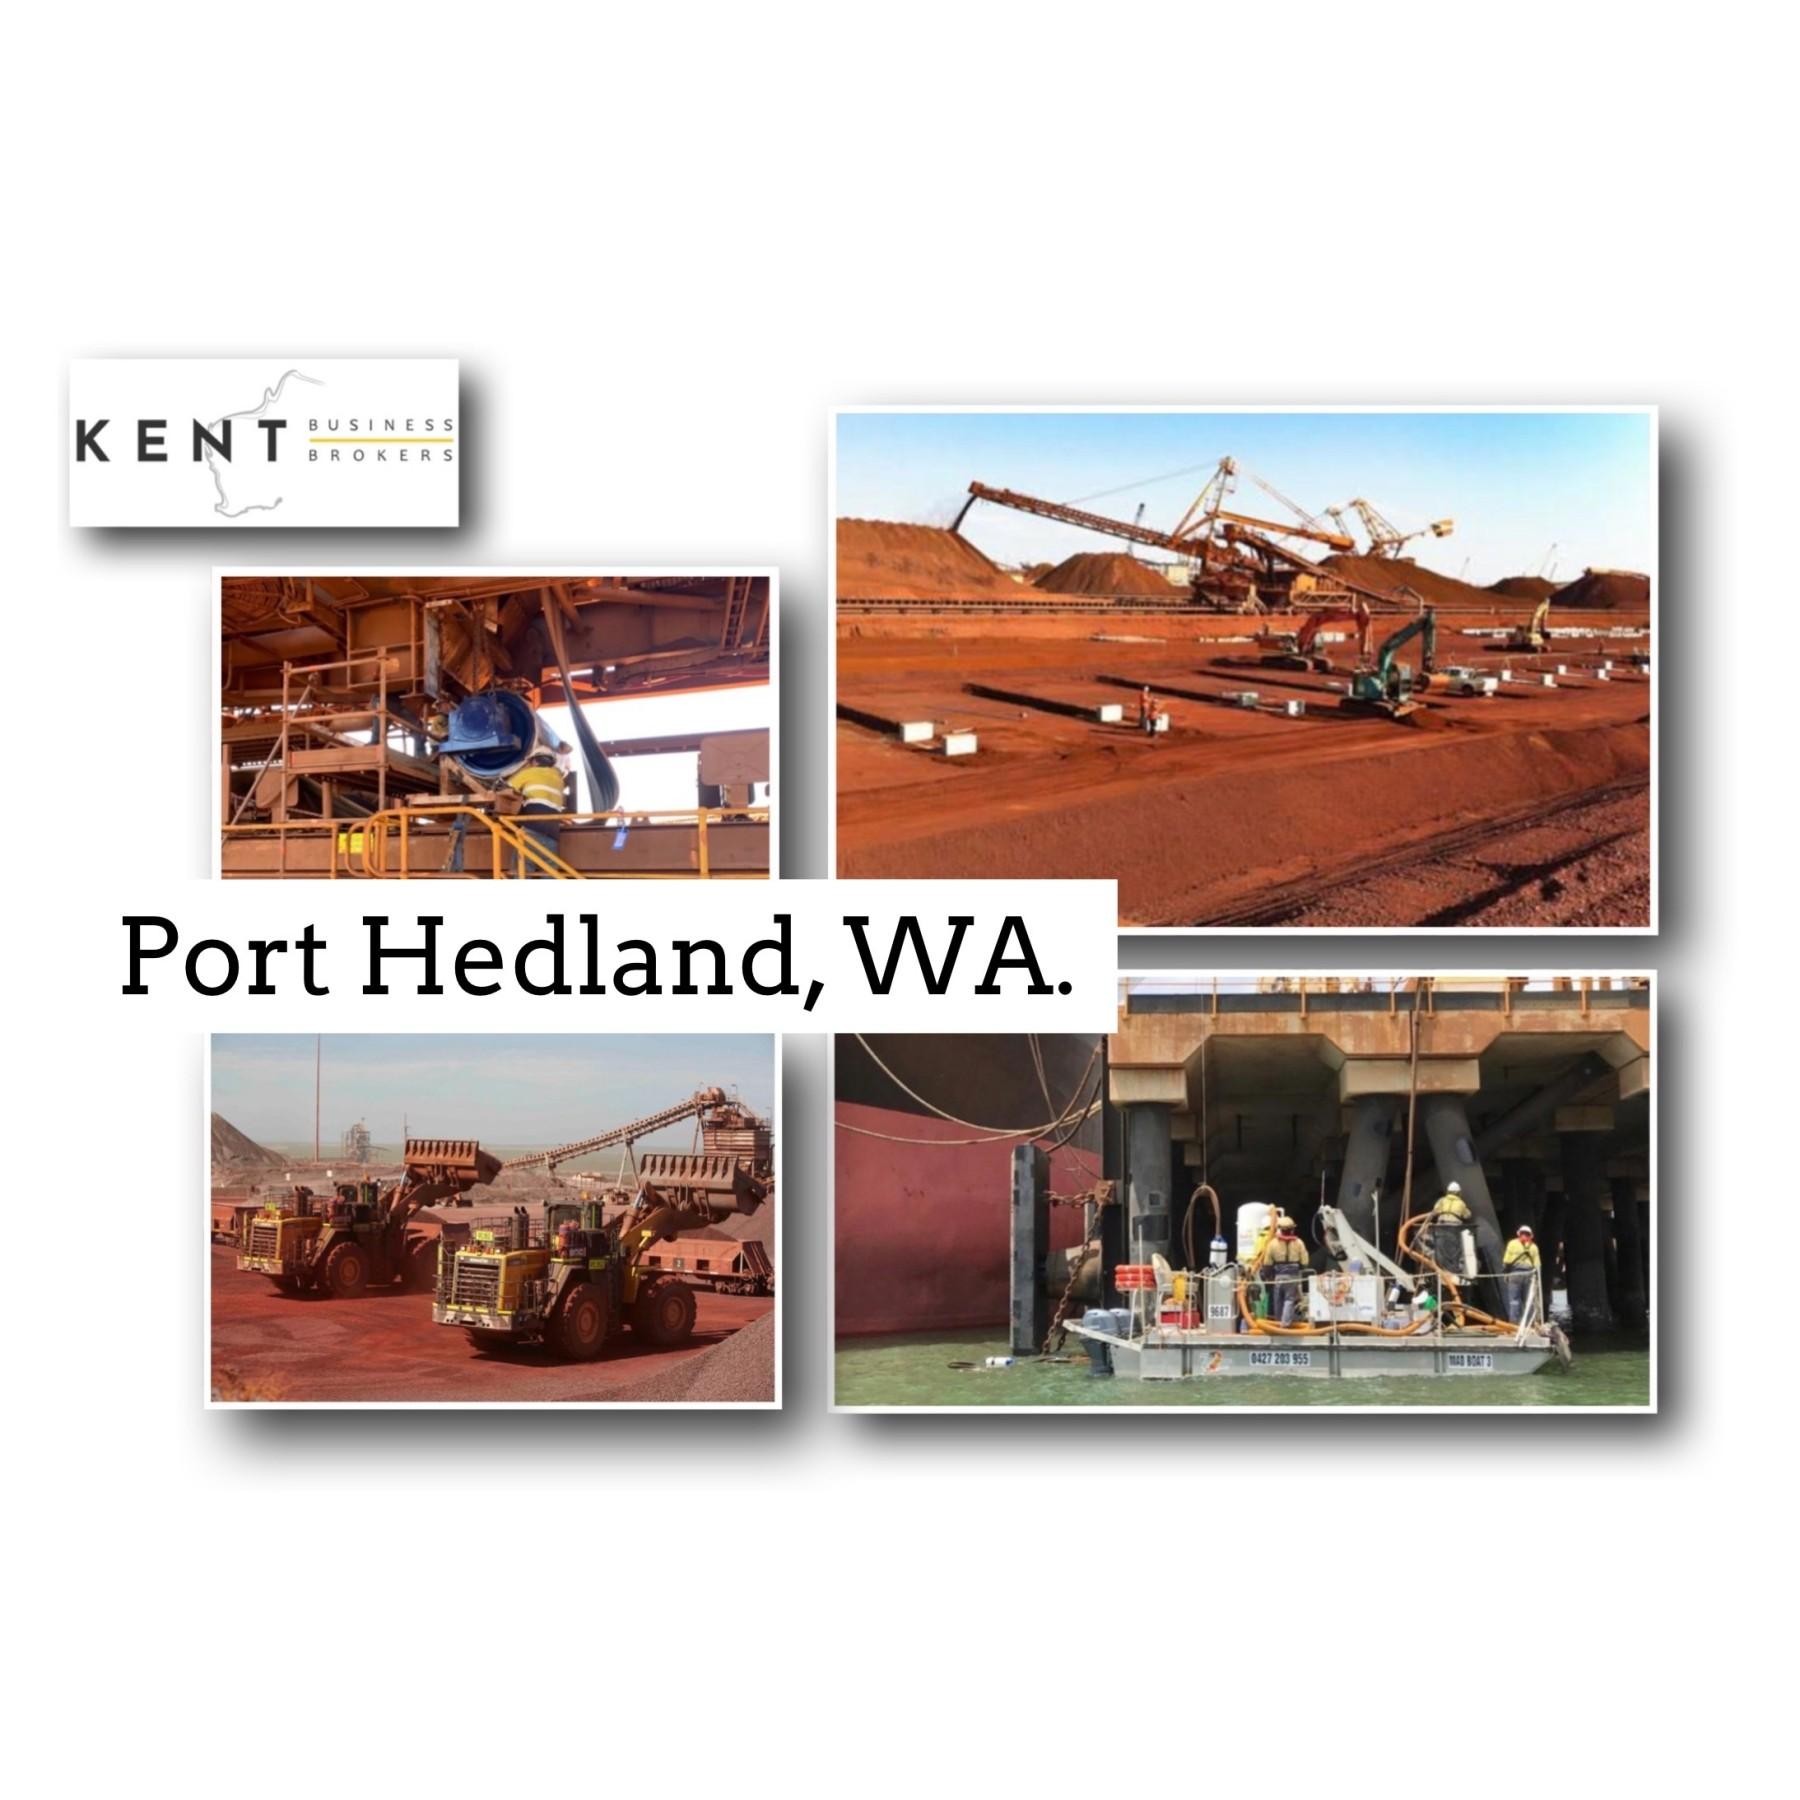 MECHANICAL AND MINING SERVICES, Port Hedland...Business For Sale